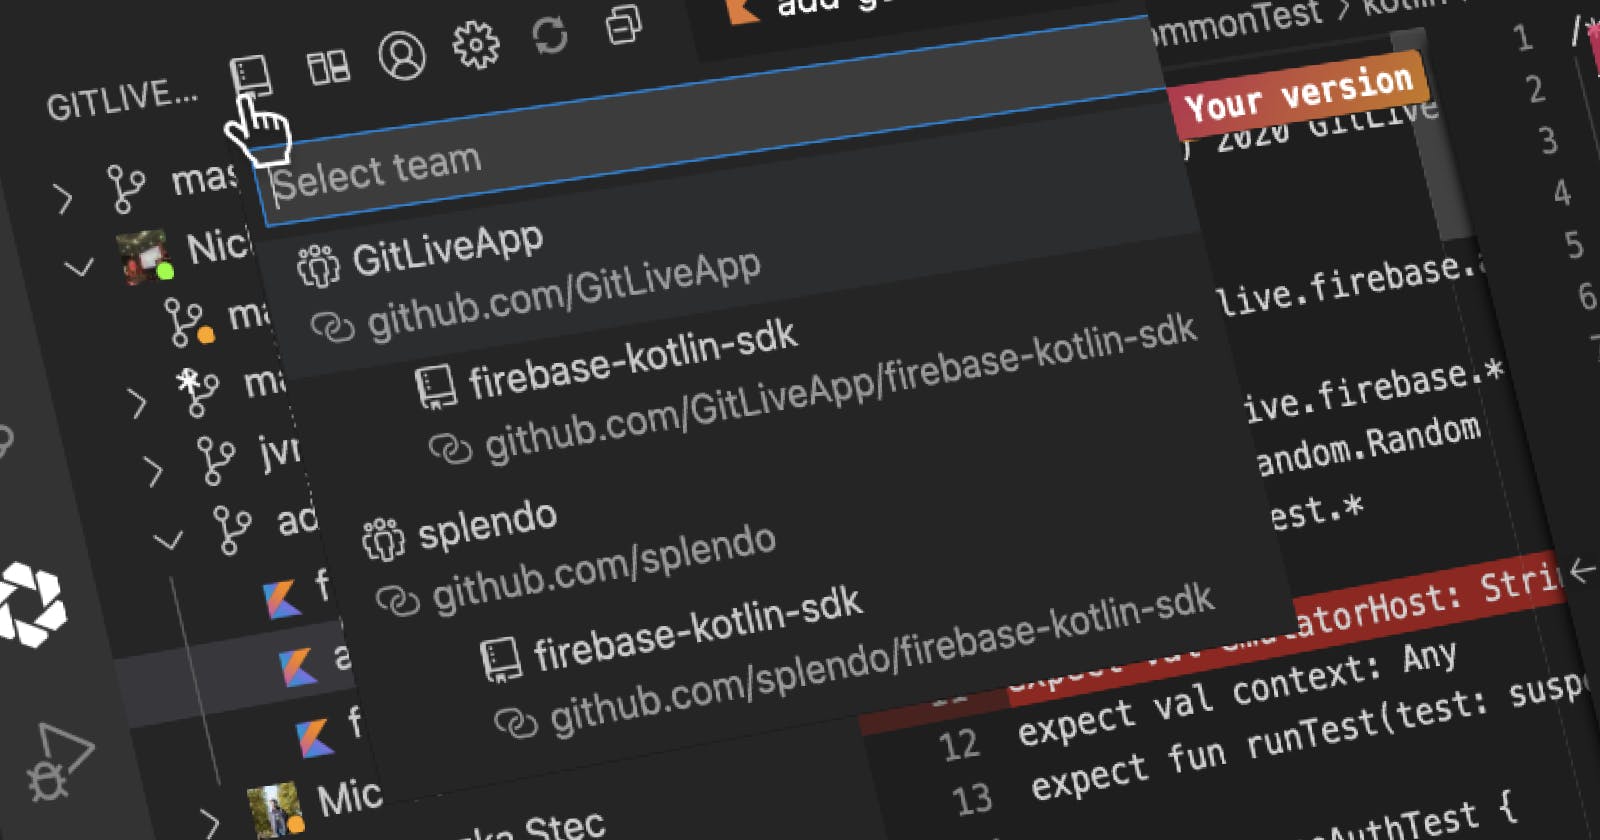 See how others' changes compare to your own in VS Code